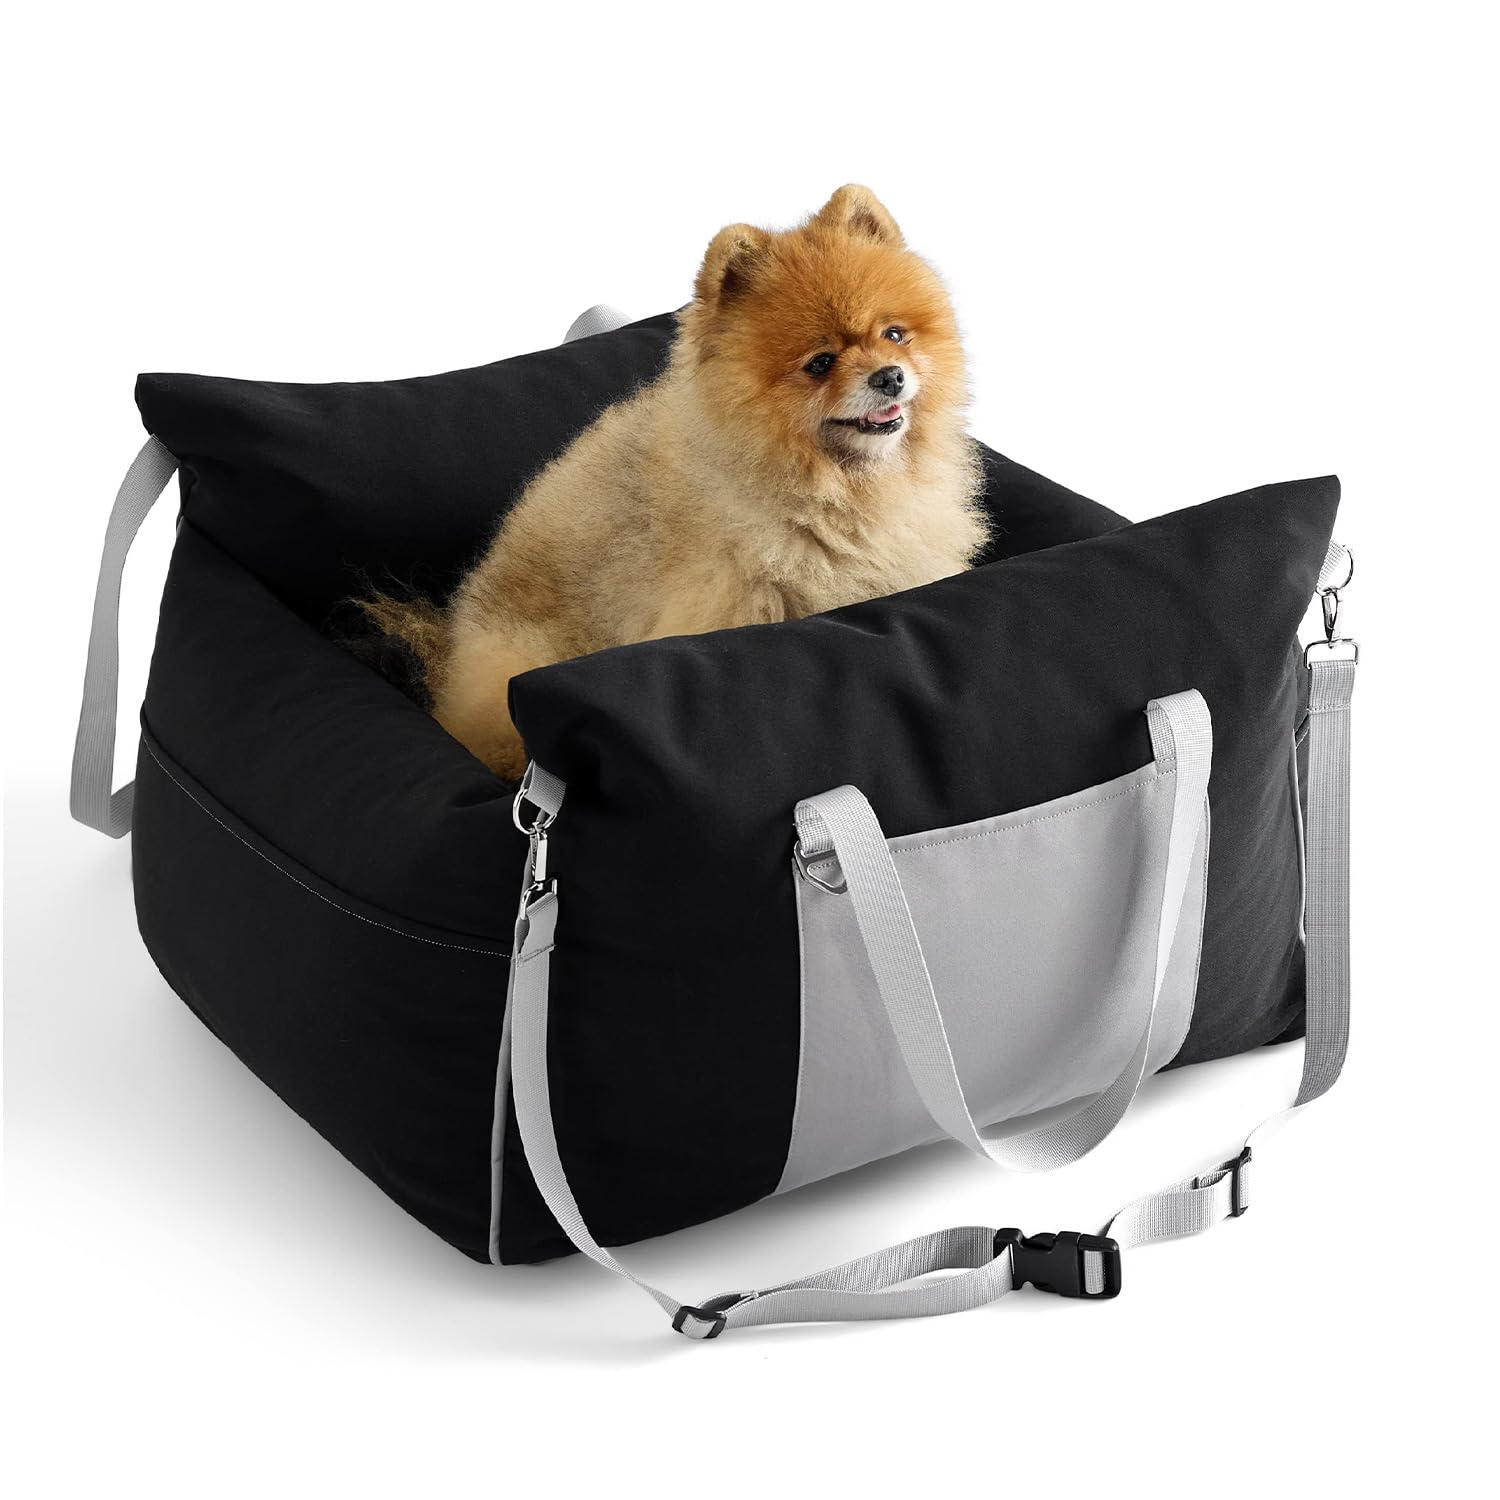 Dog Car Seat, Pet Travel Carrier Bed